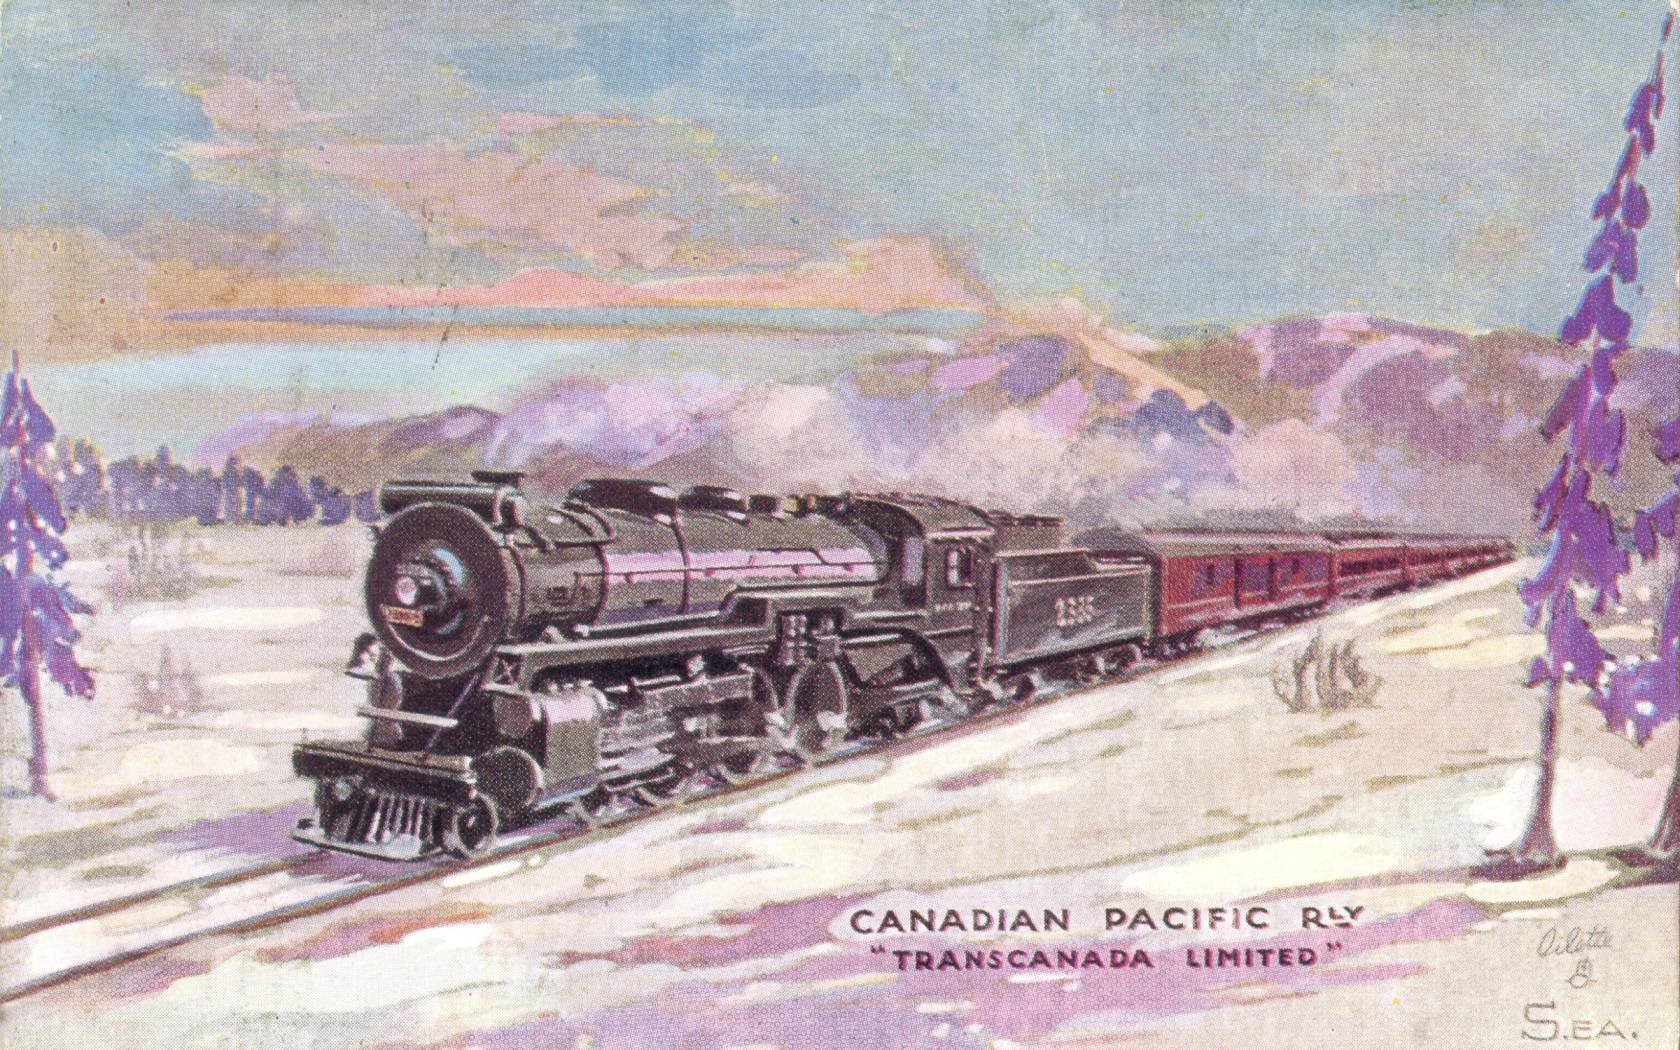 The Southern Pacific Railroad - Railway Wonders of the World